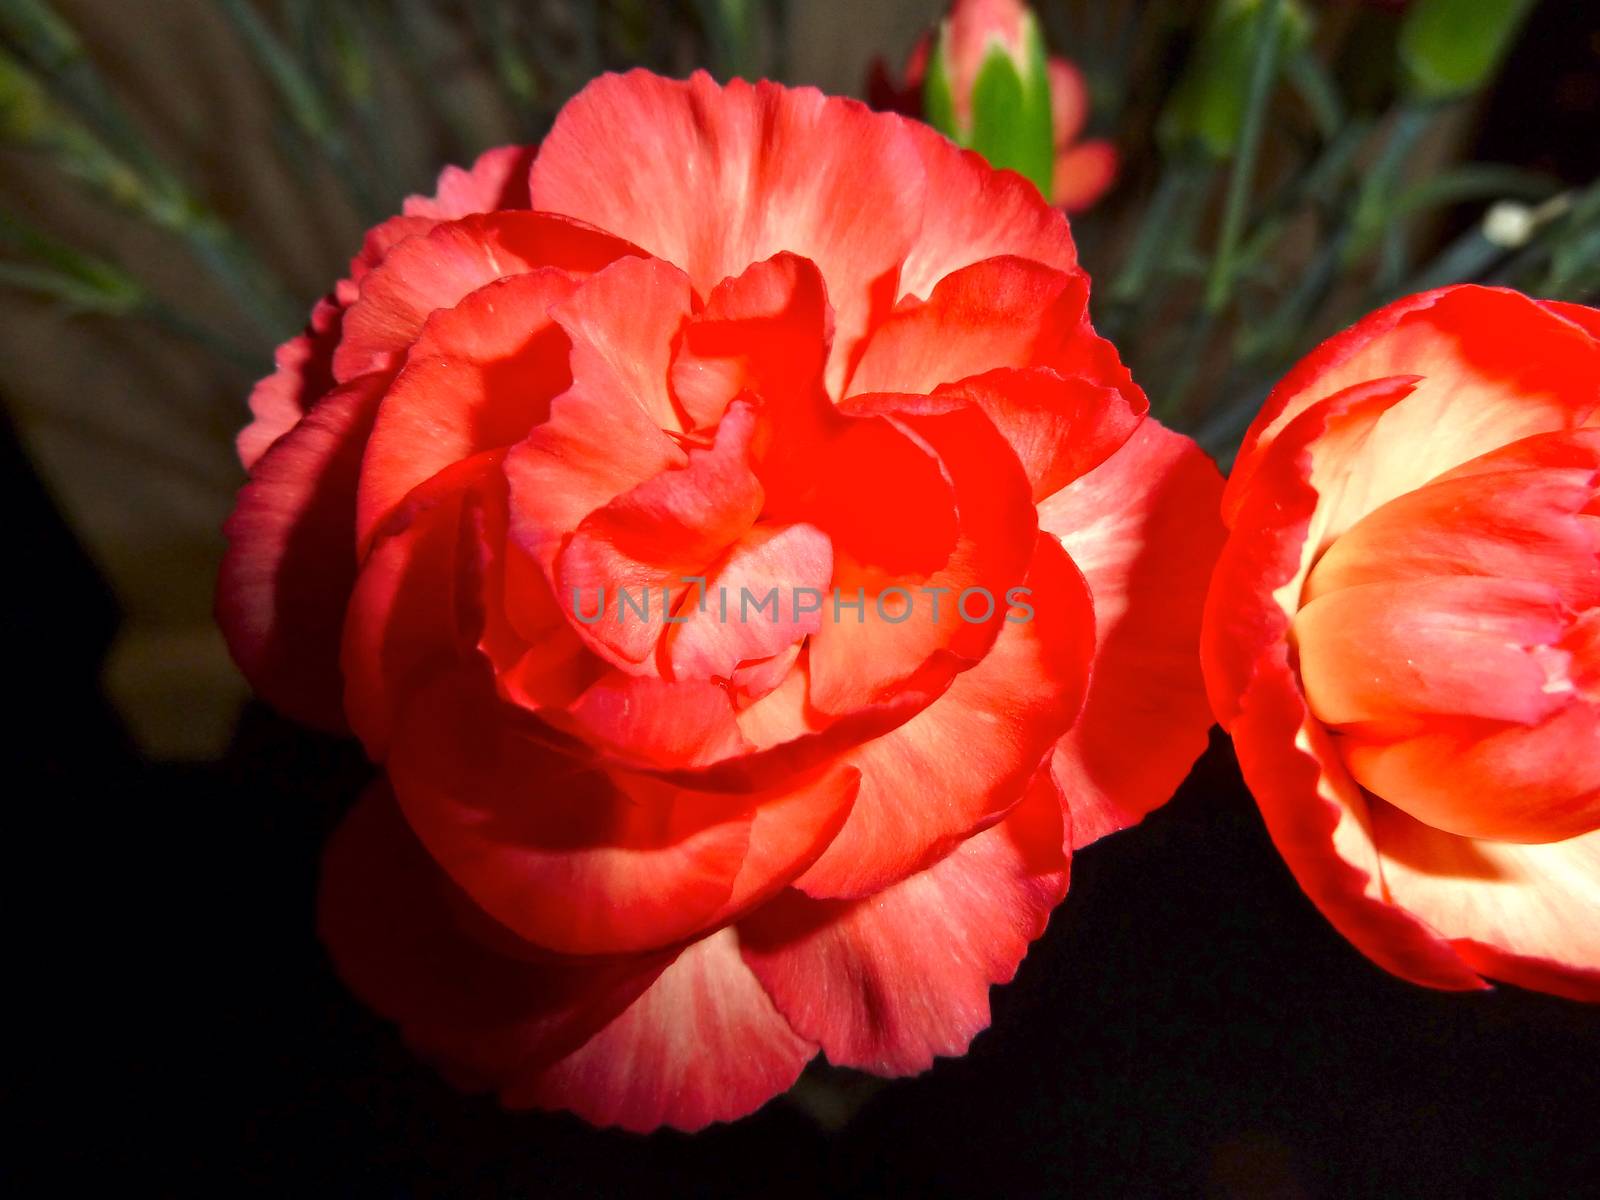 Bright red carnation flower as a pretty background image